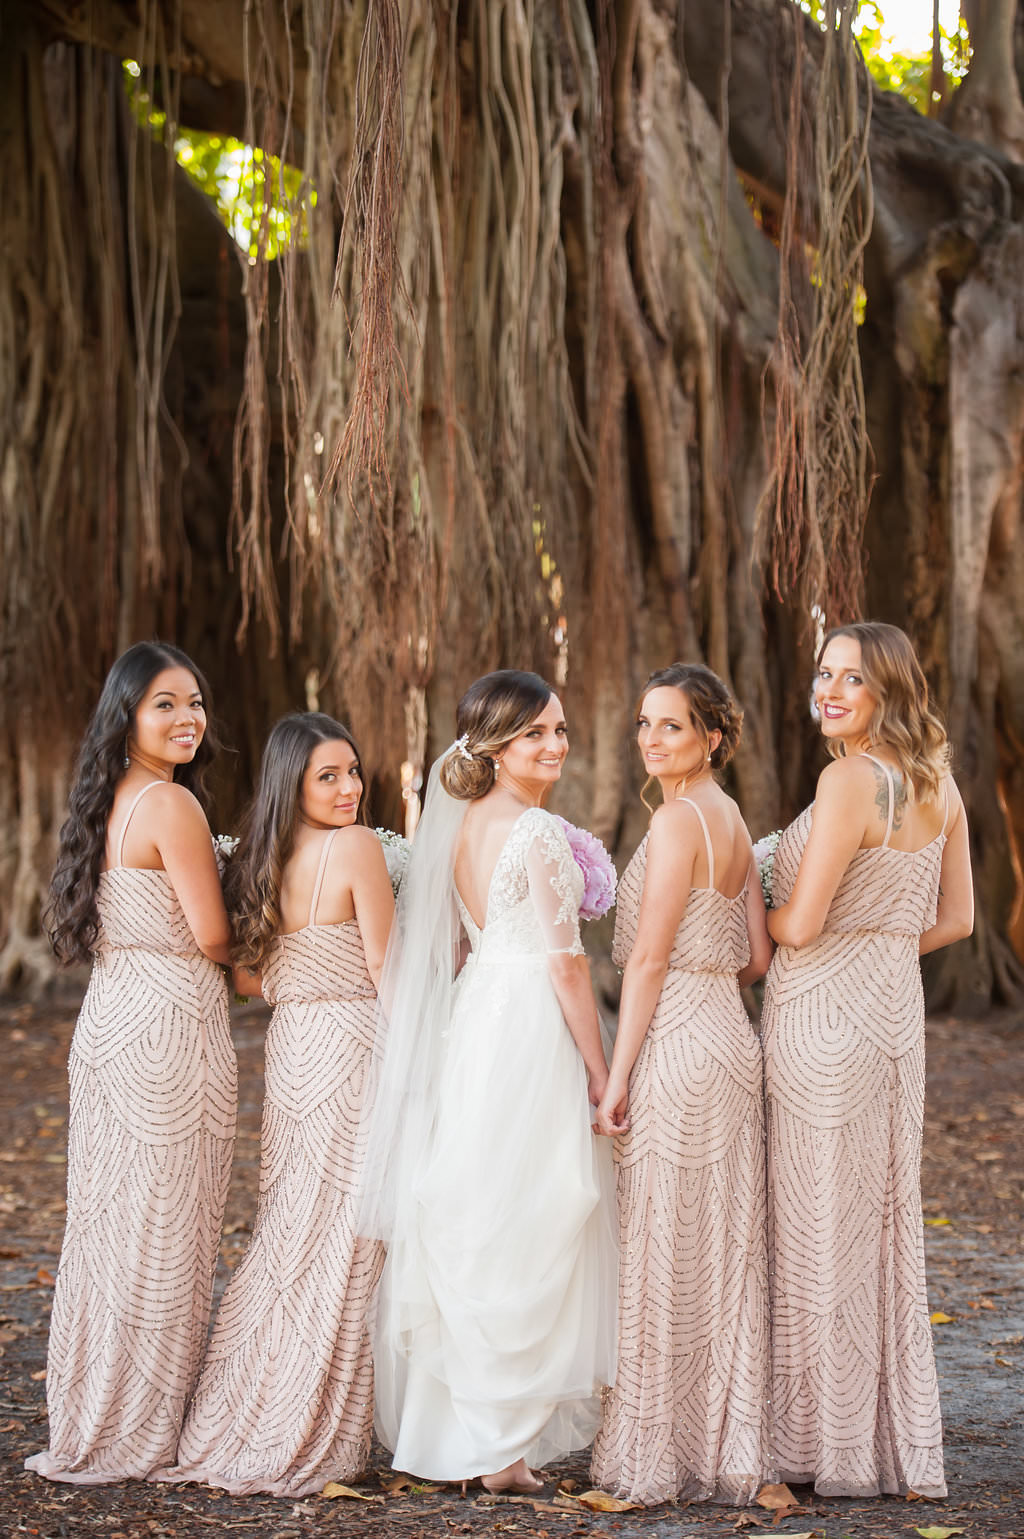 Outdoor Bridal Party Portrait with Banyan Trees, Bride in V Back Lace Sleeve Davids Bridal Dress, Bridesmaids in Beaded Column Blush Pink Adrianna Papell Dresses | Downtown St Pete Wedding Cermony Venue North Straub Park